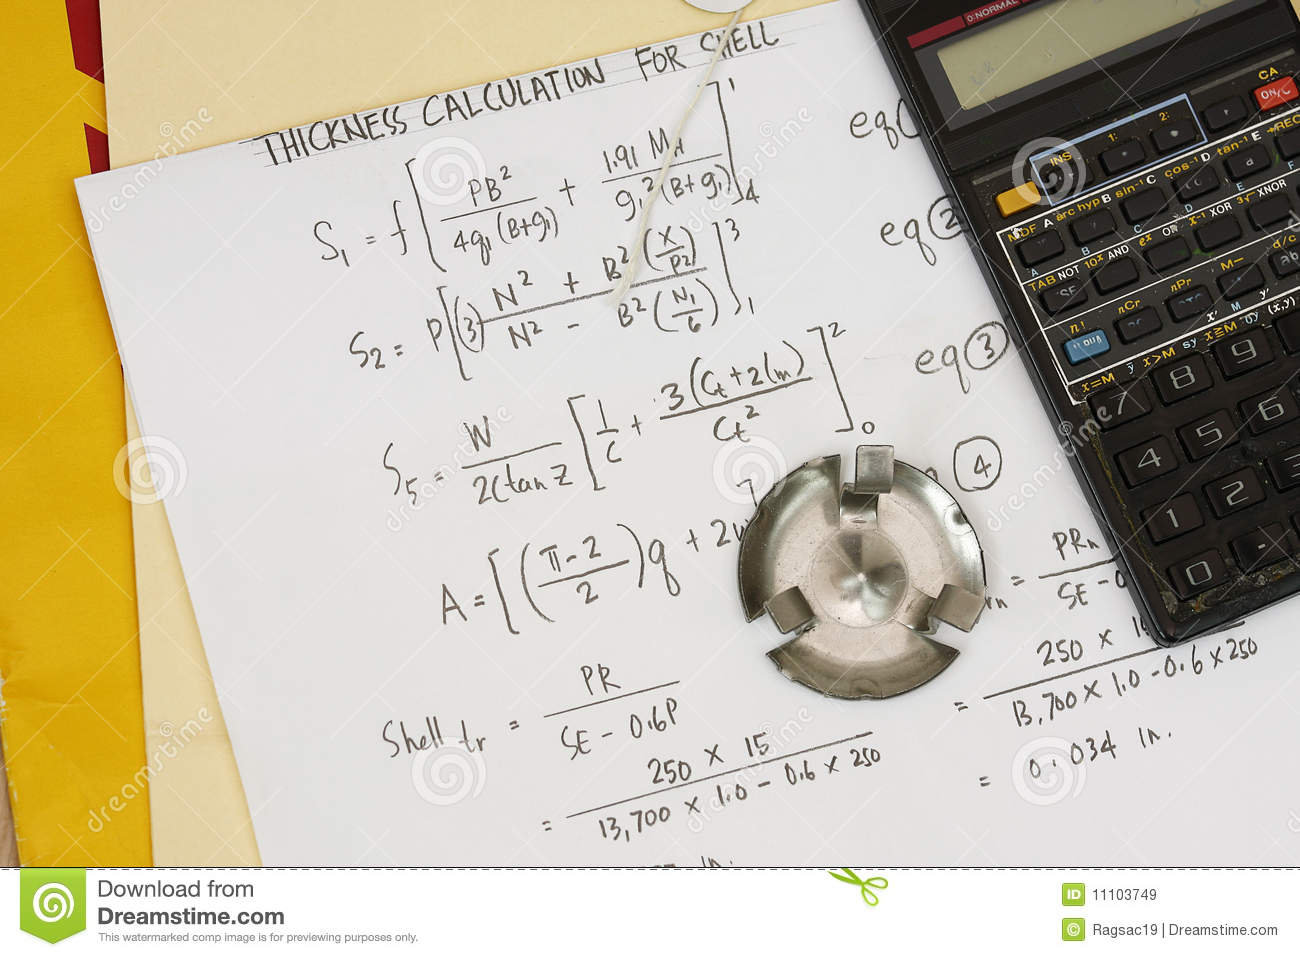 Asme Calculation software, free download